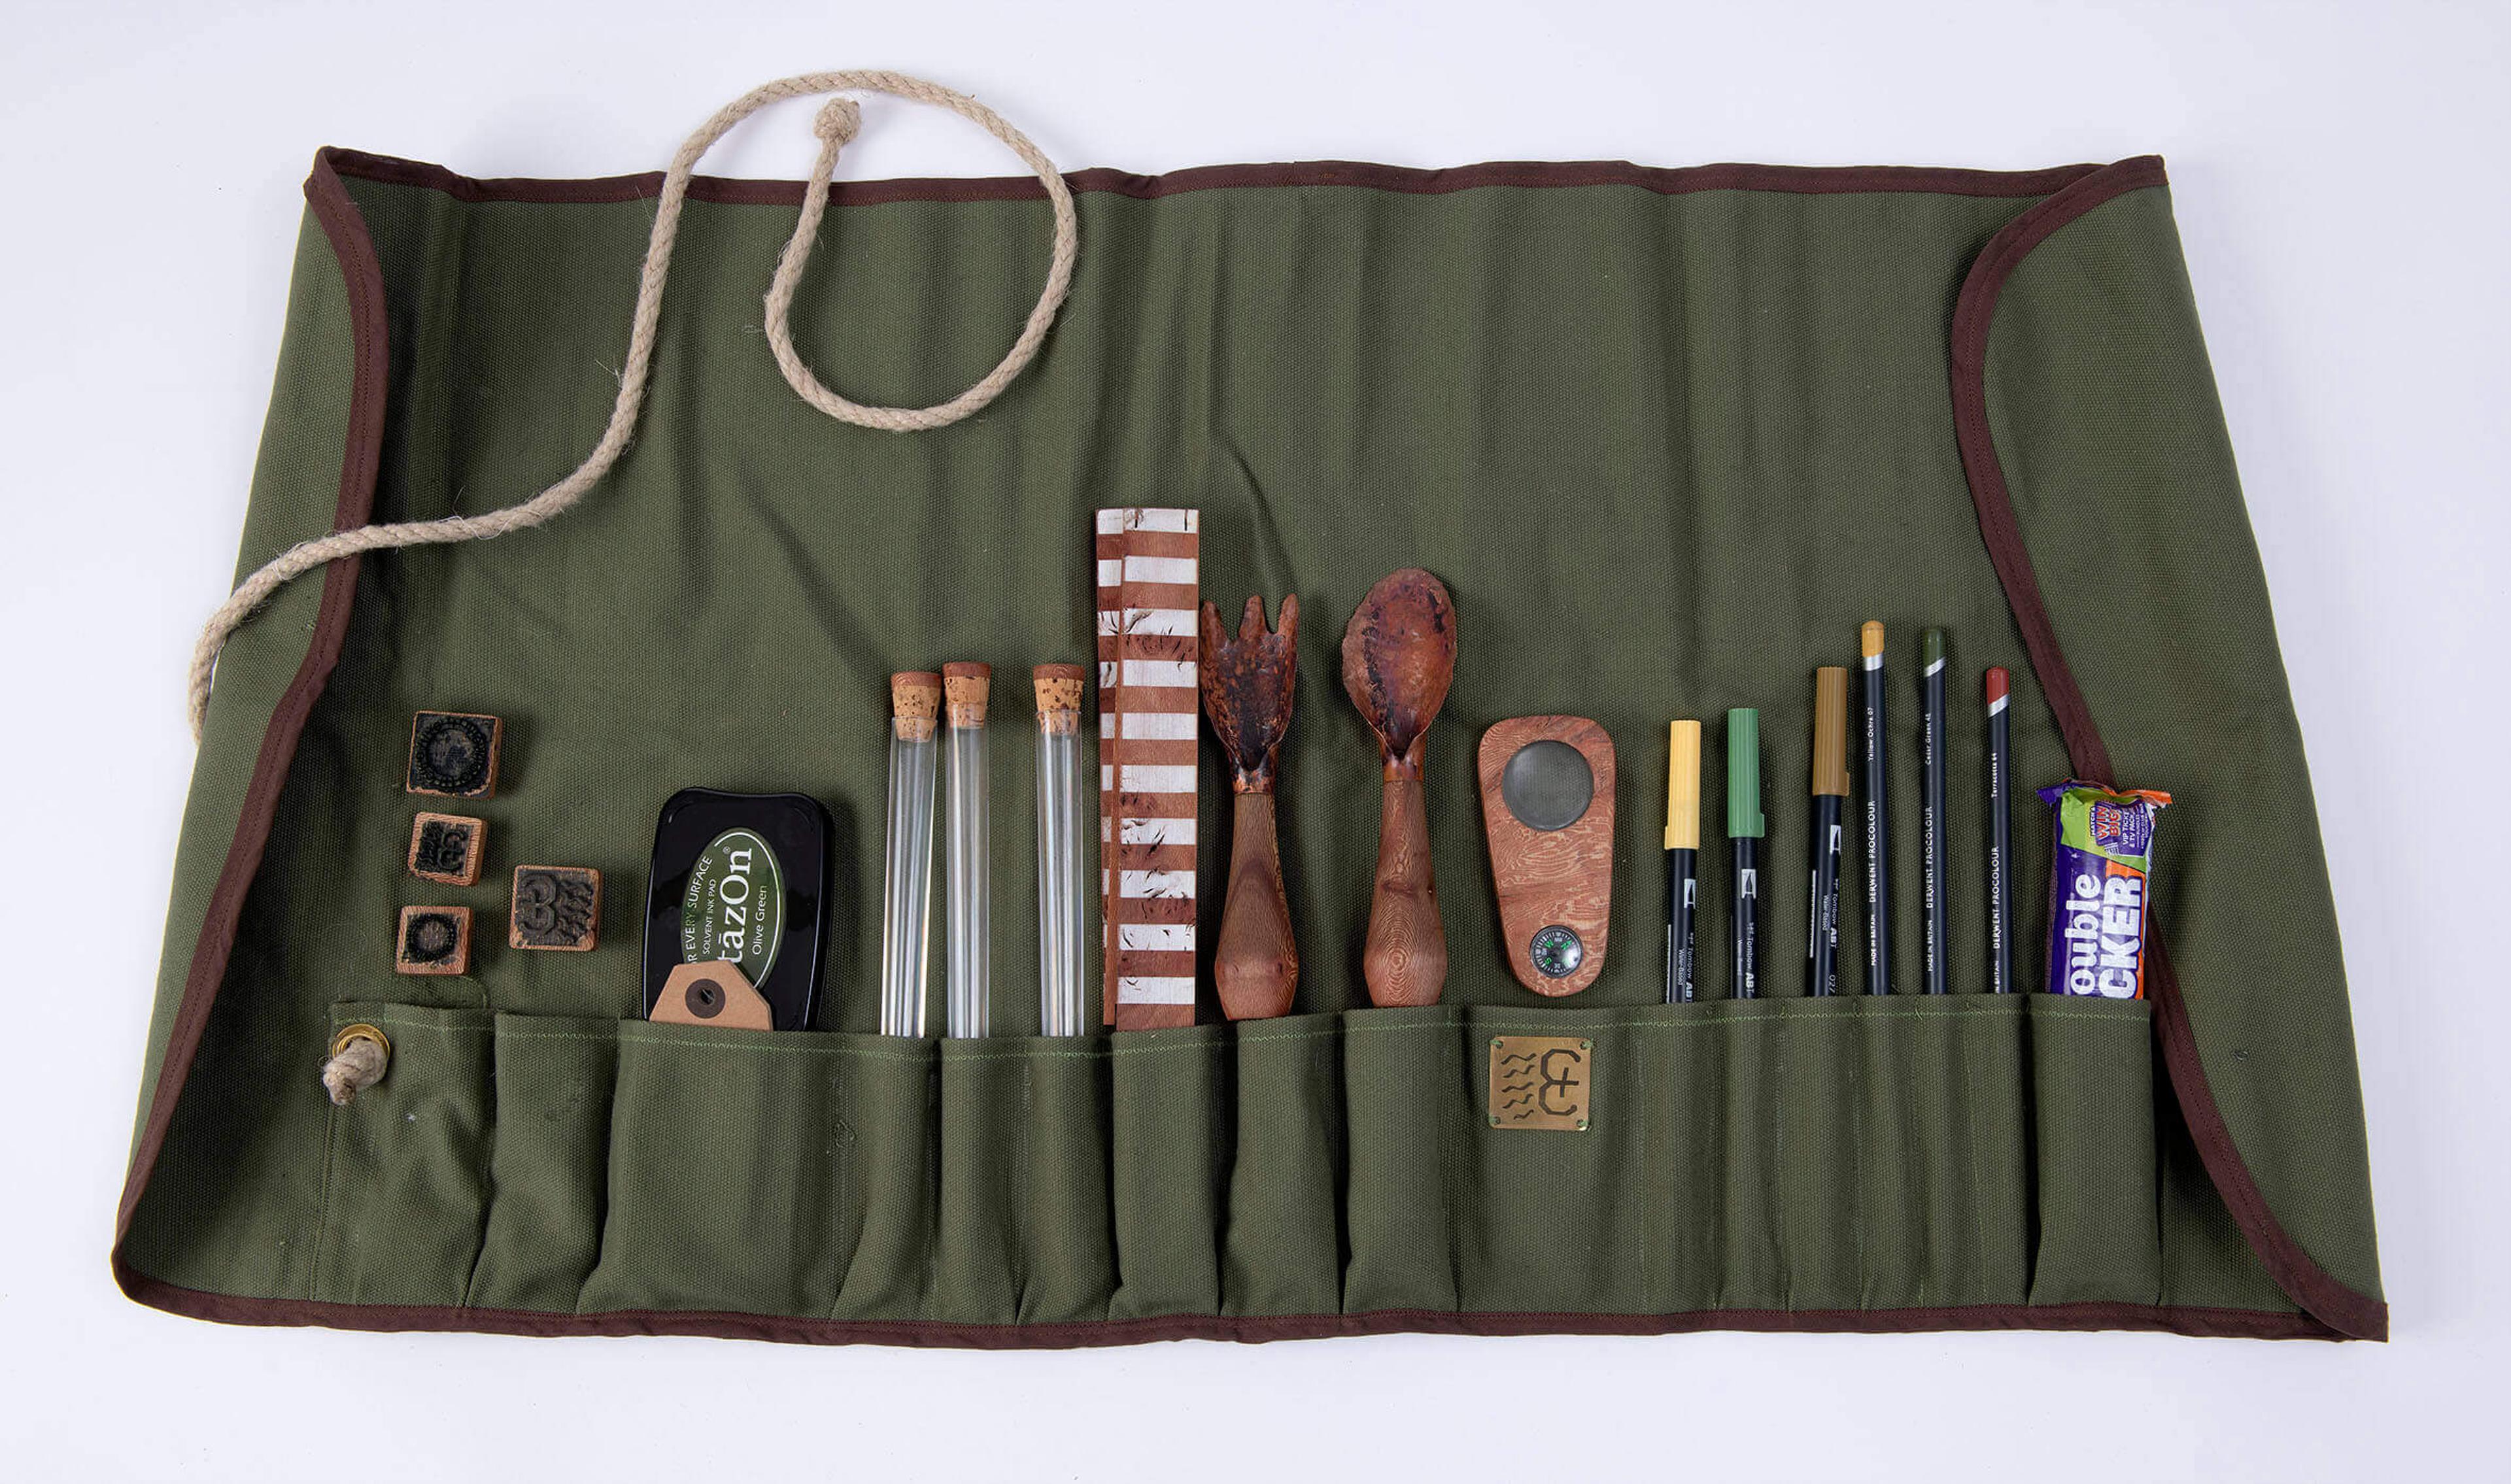 Photograph of an archaelogy kit with various tools.